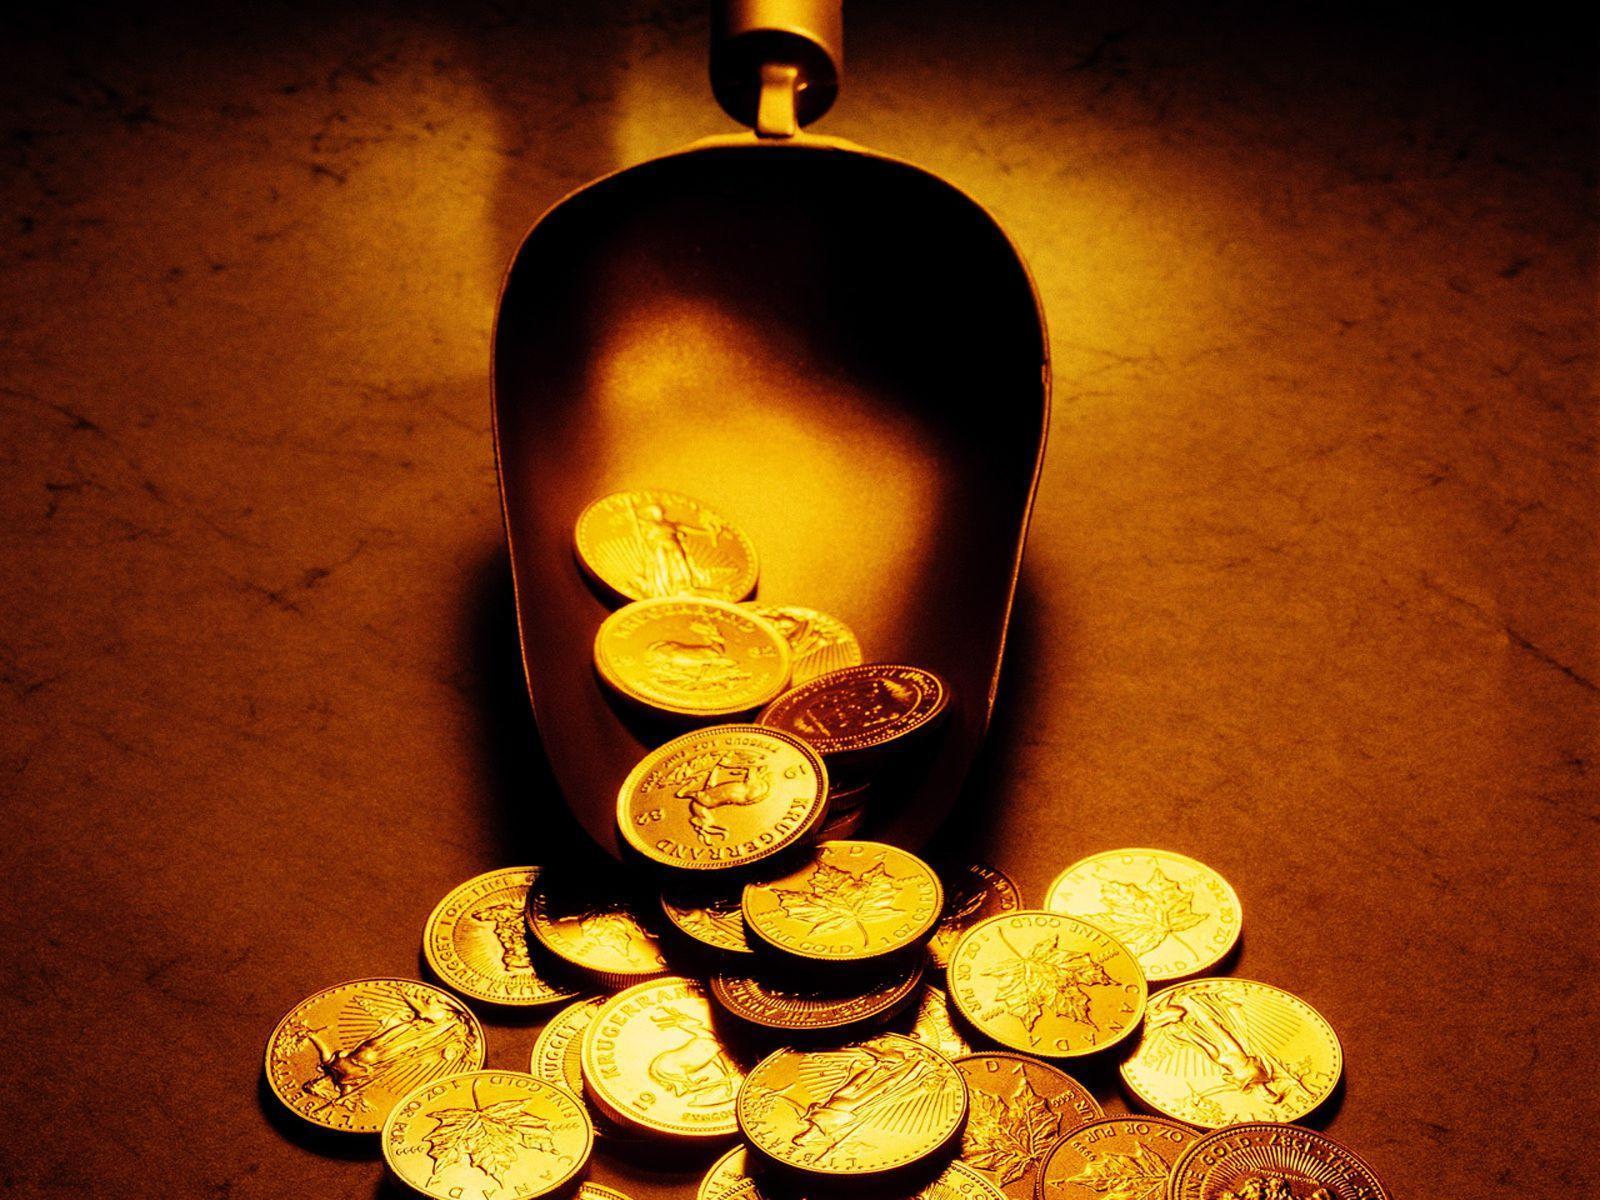 Gold Coin Aesthetic Wallpapers